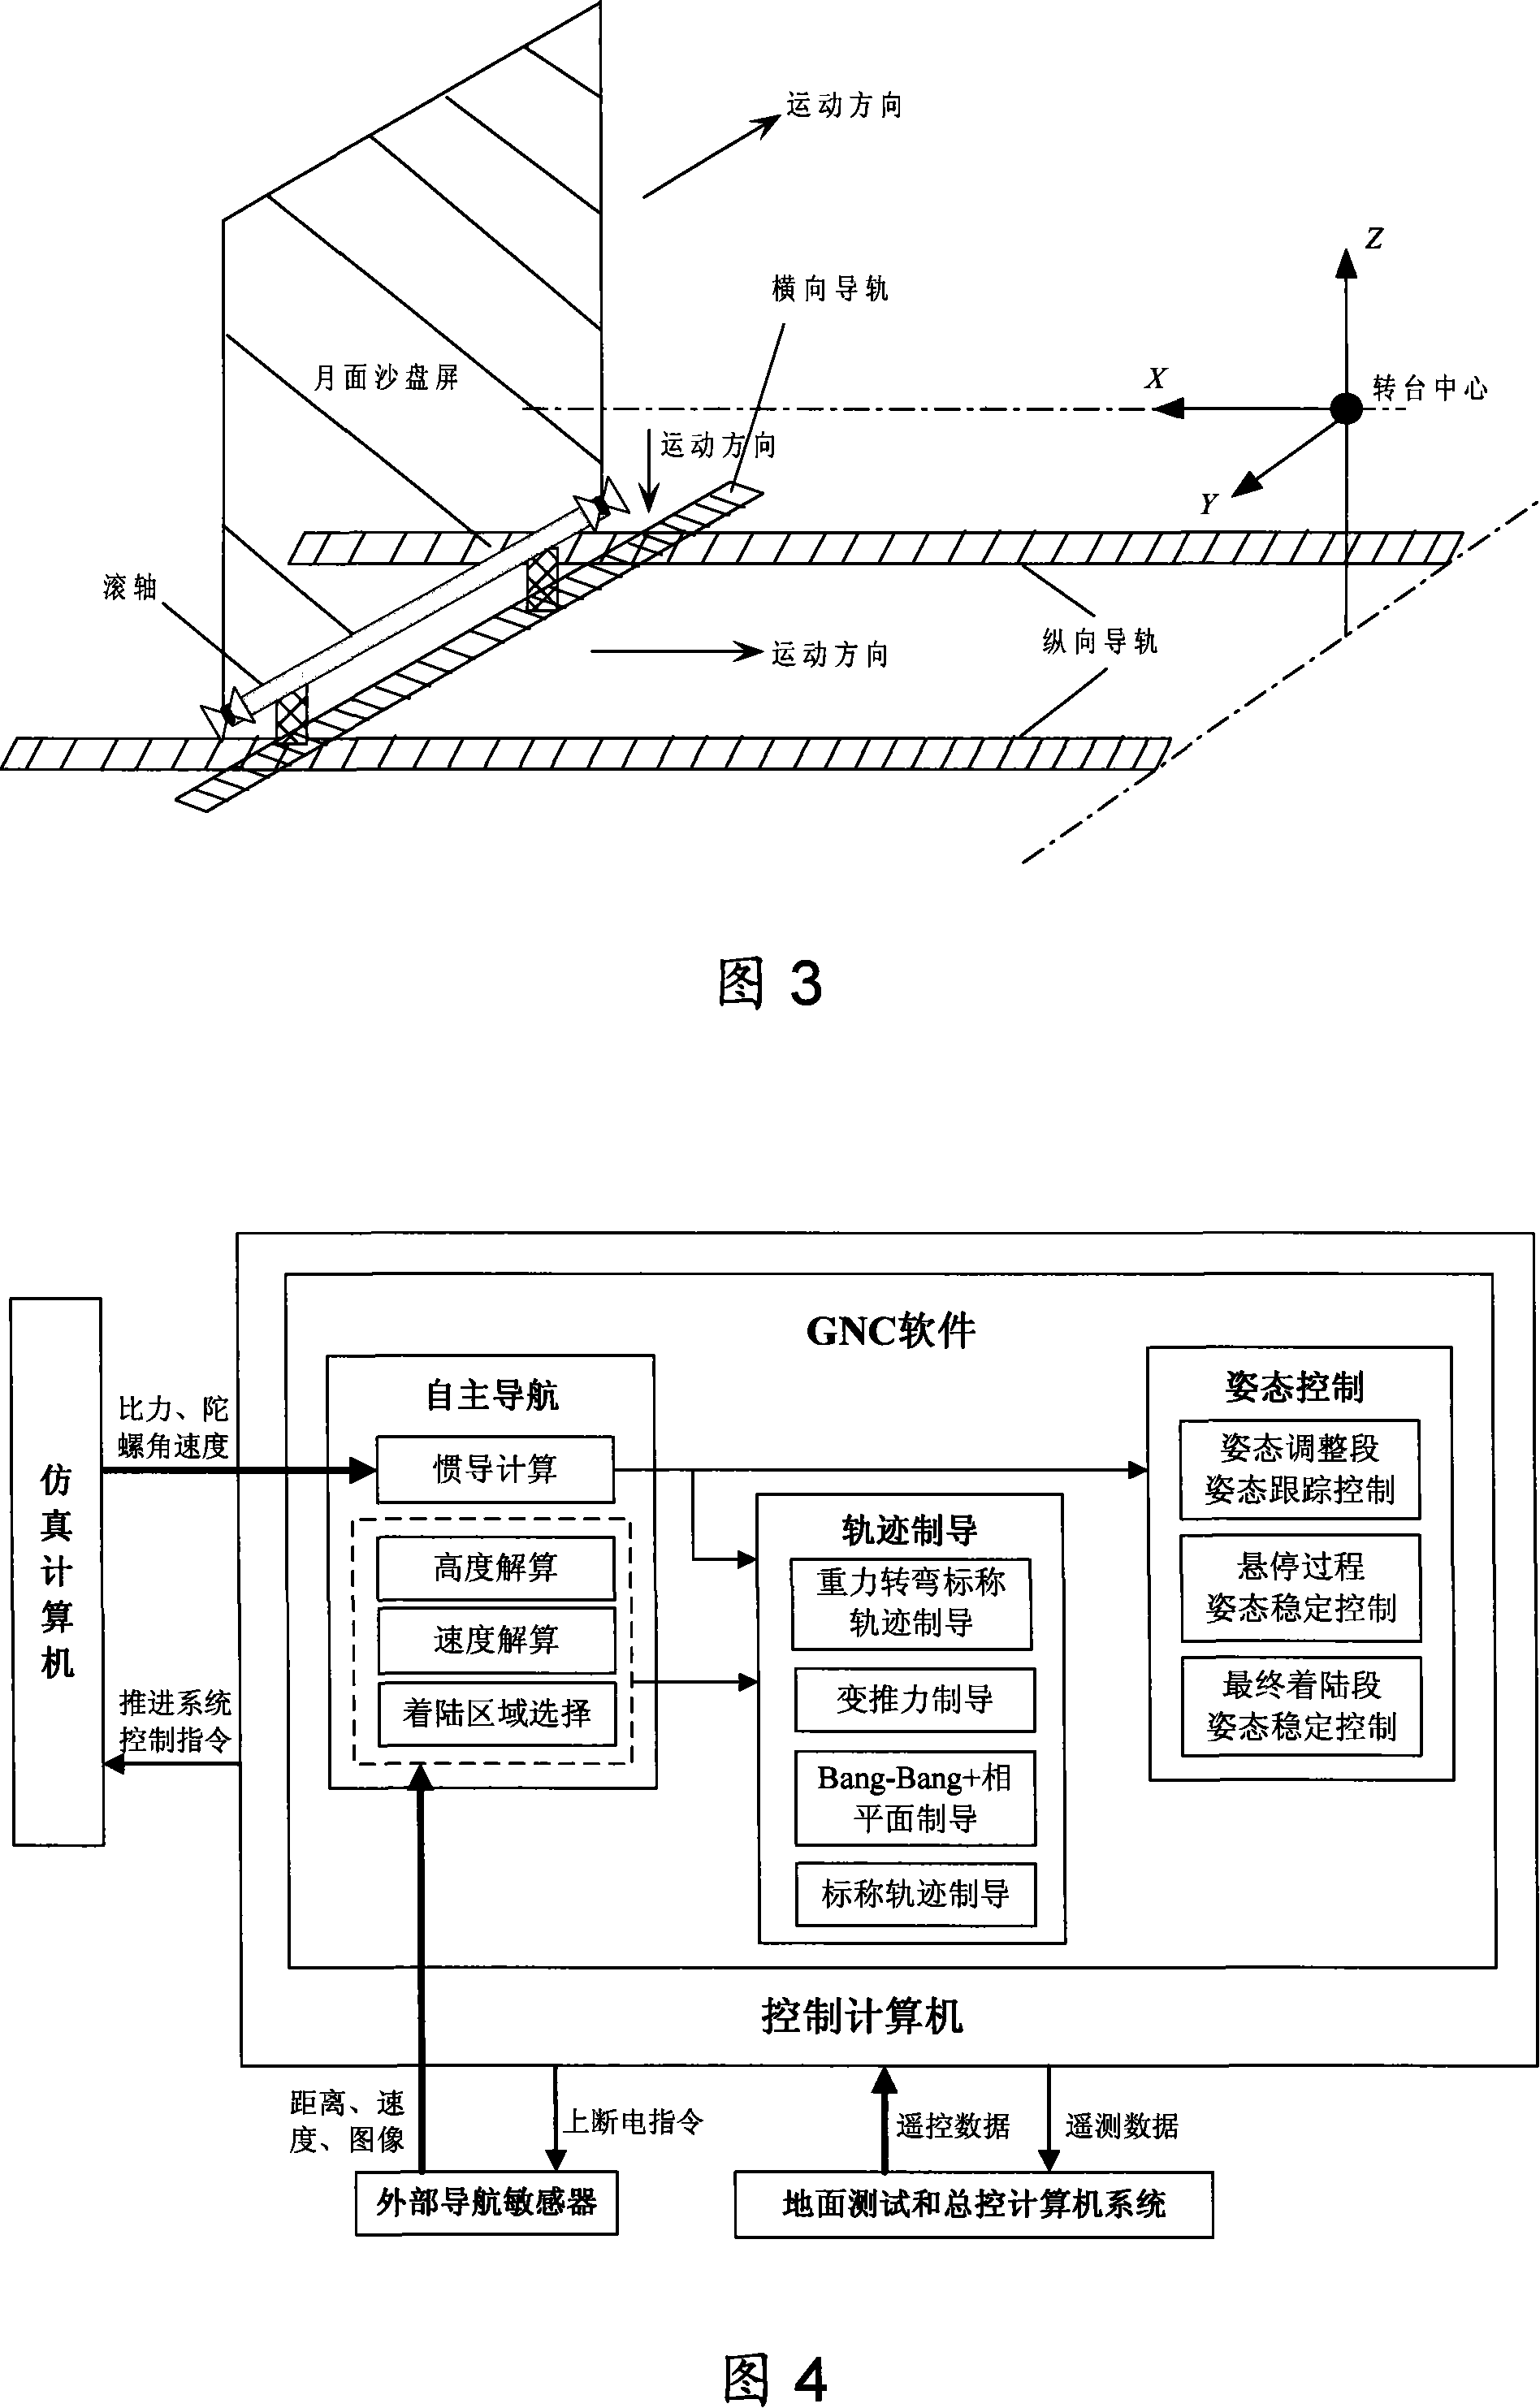 Half-physical emulation test system for controlling and guiding, navigating and controlling soft landing for moon